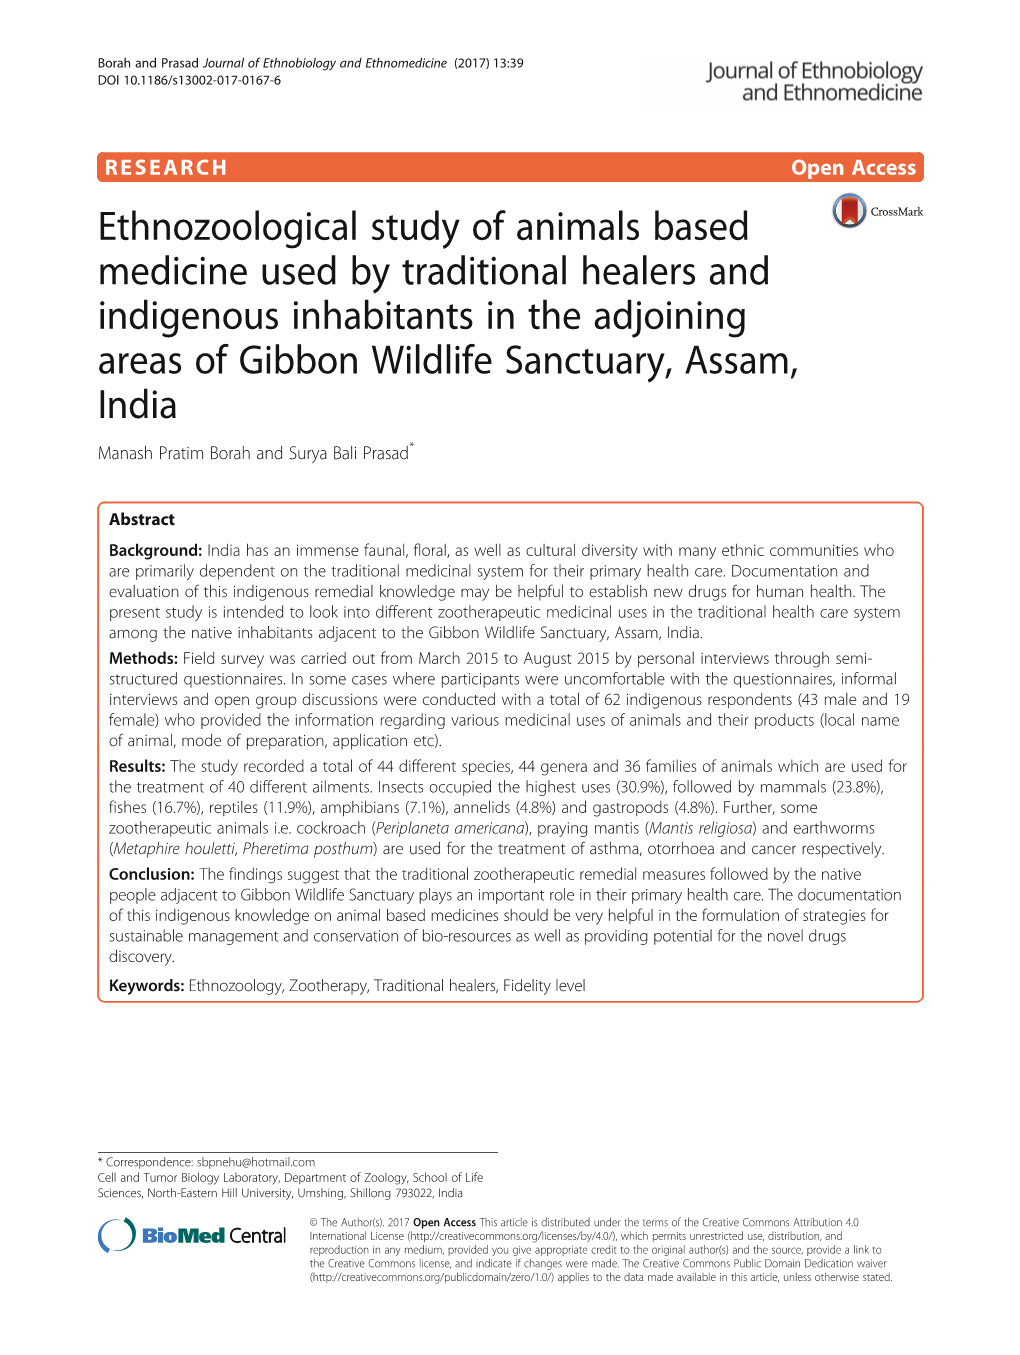 Ethnozoological Study of Animals Based Medicine Used by Traditional